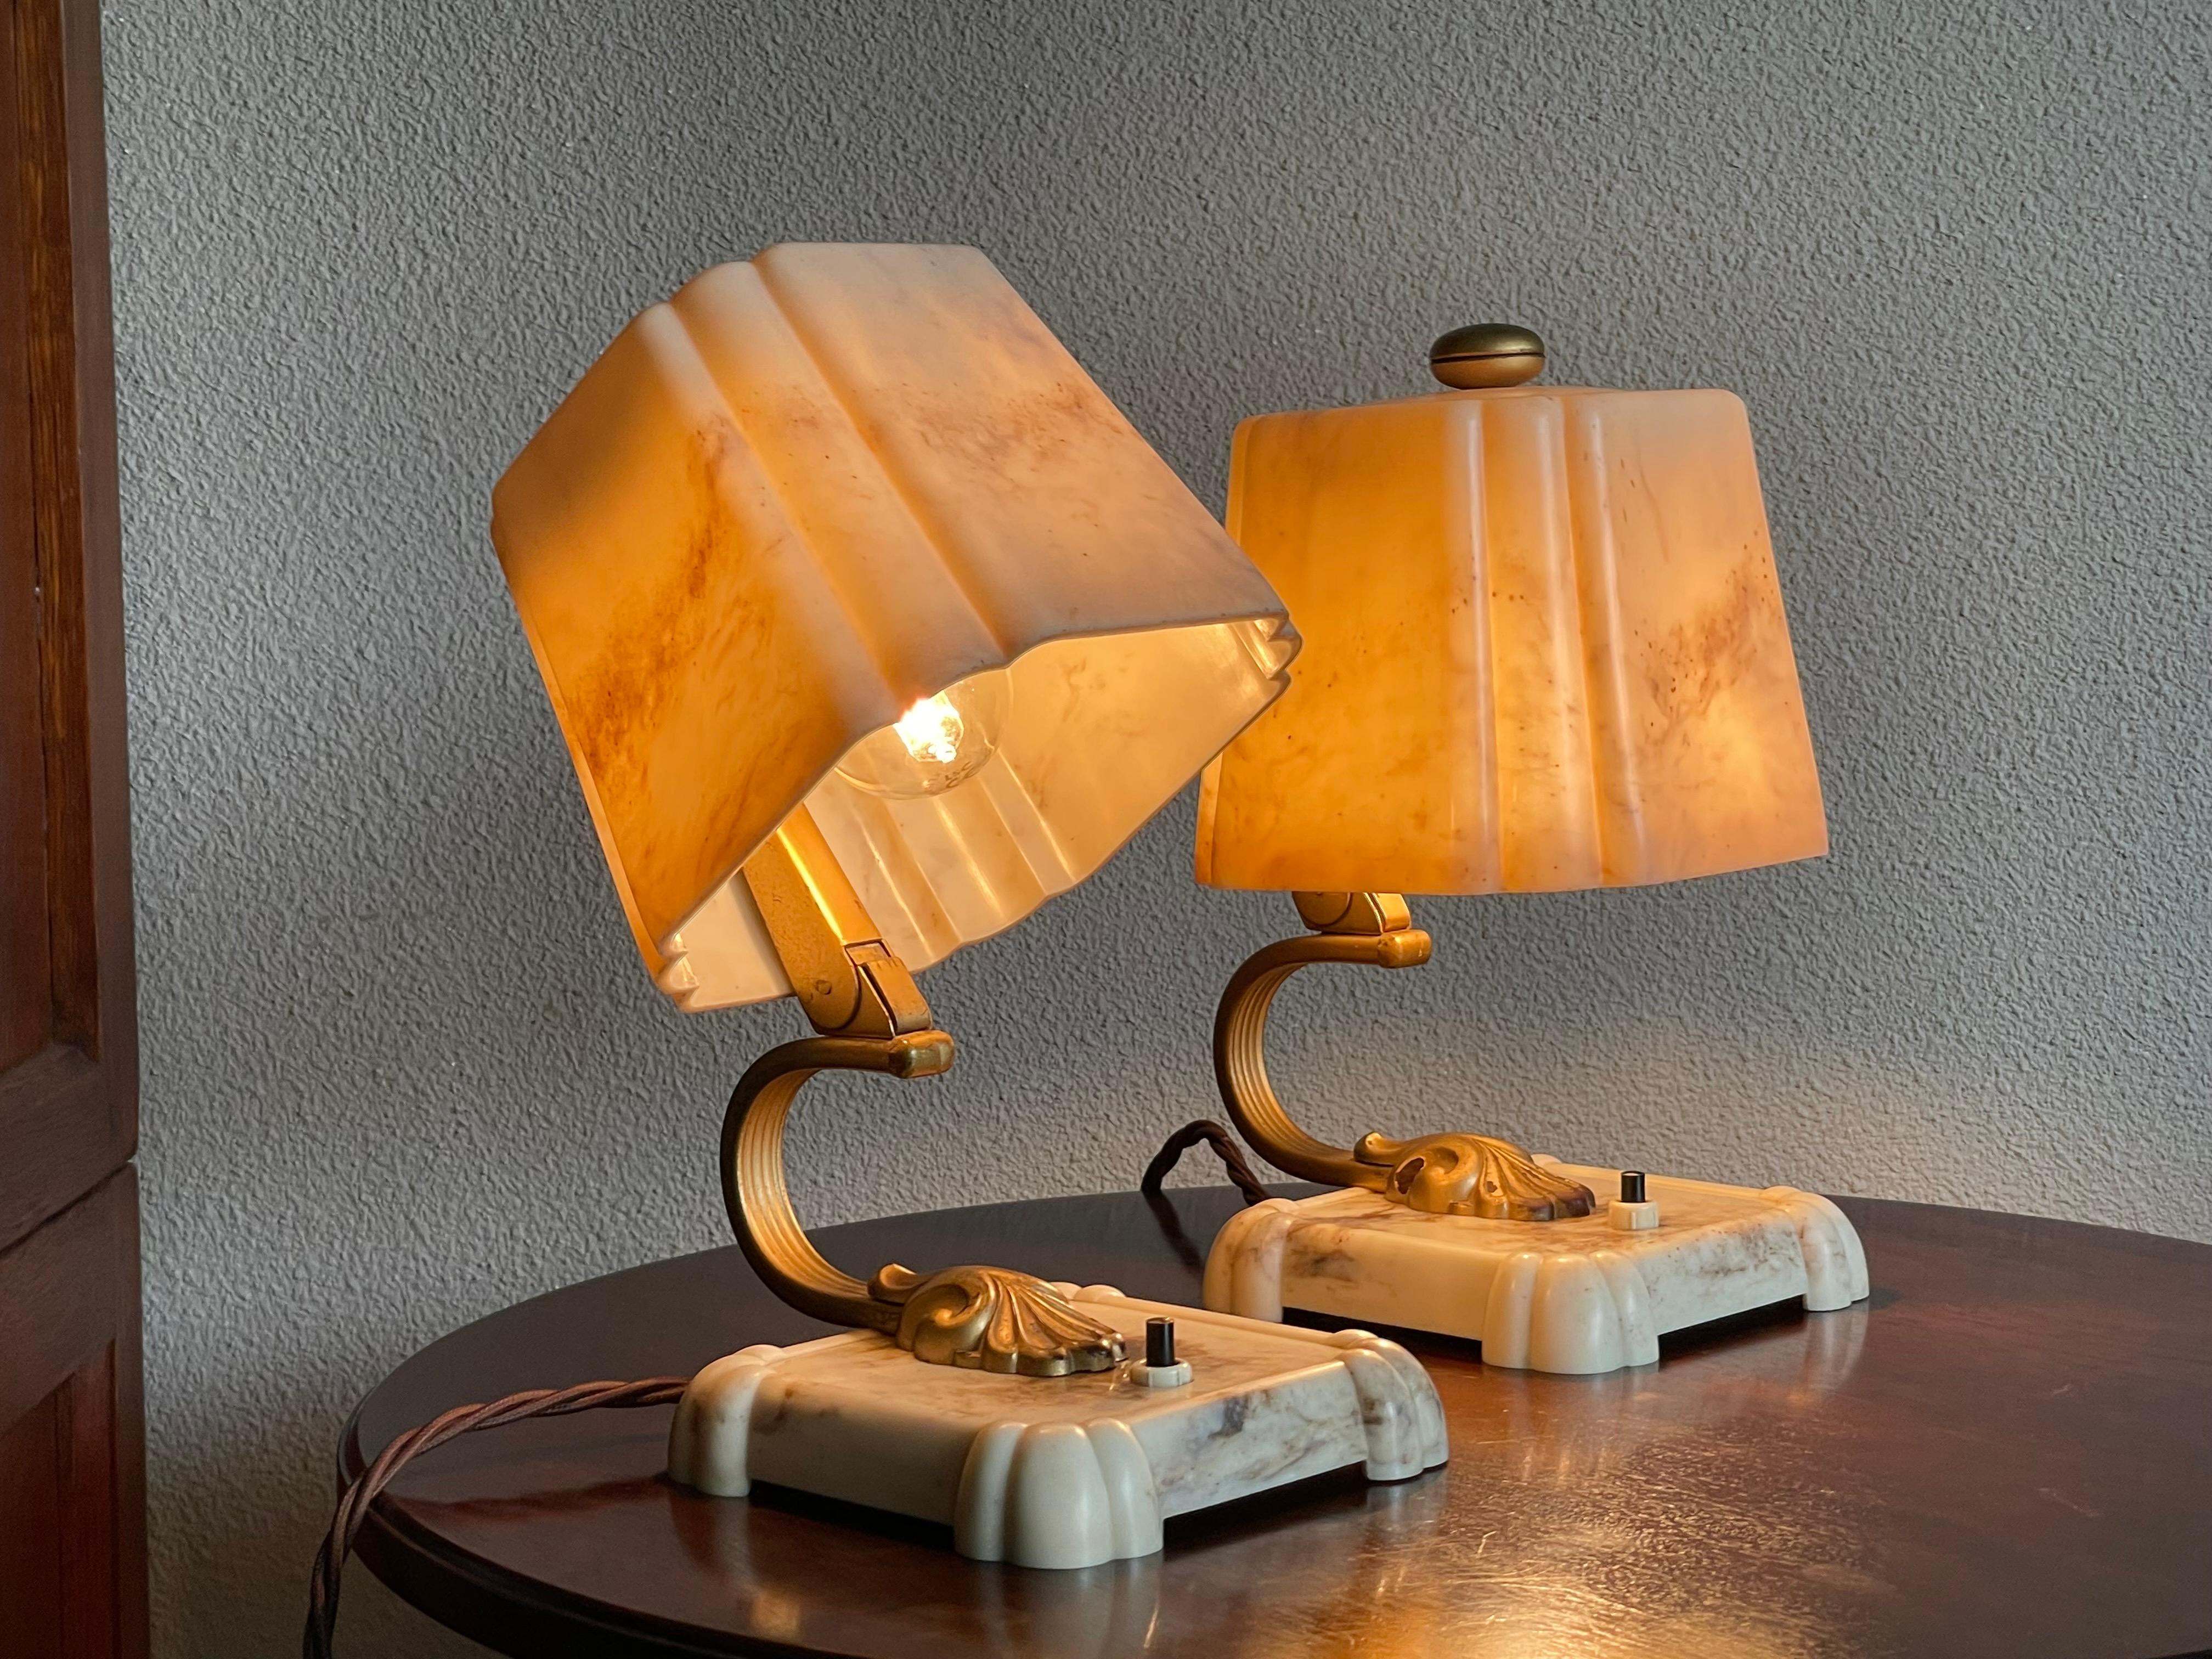 Stunning and Rare Pair of 1930s Art Deco Table or Bedside Lamps Made of Bakelite 1